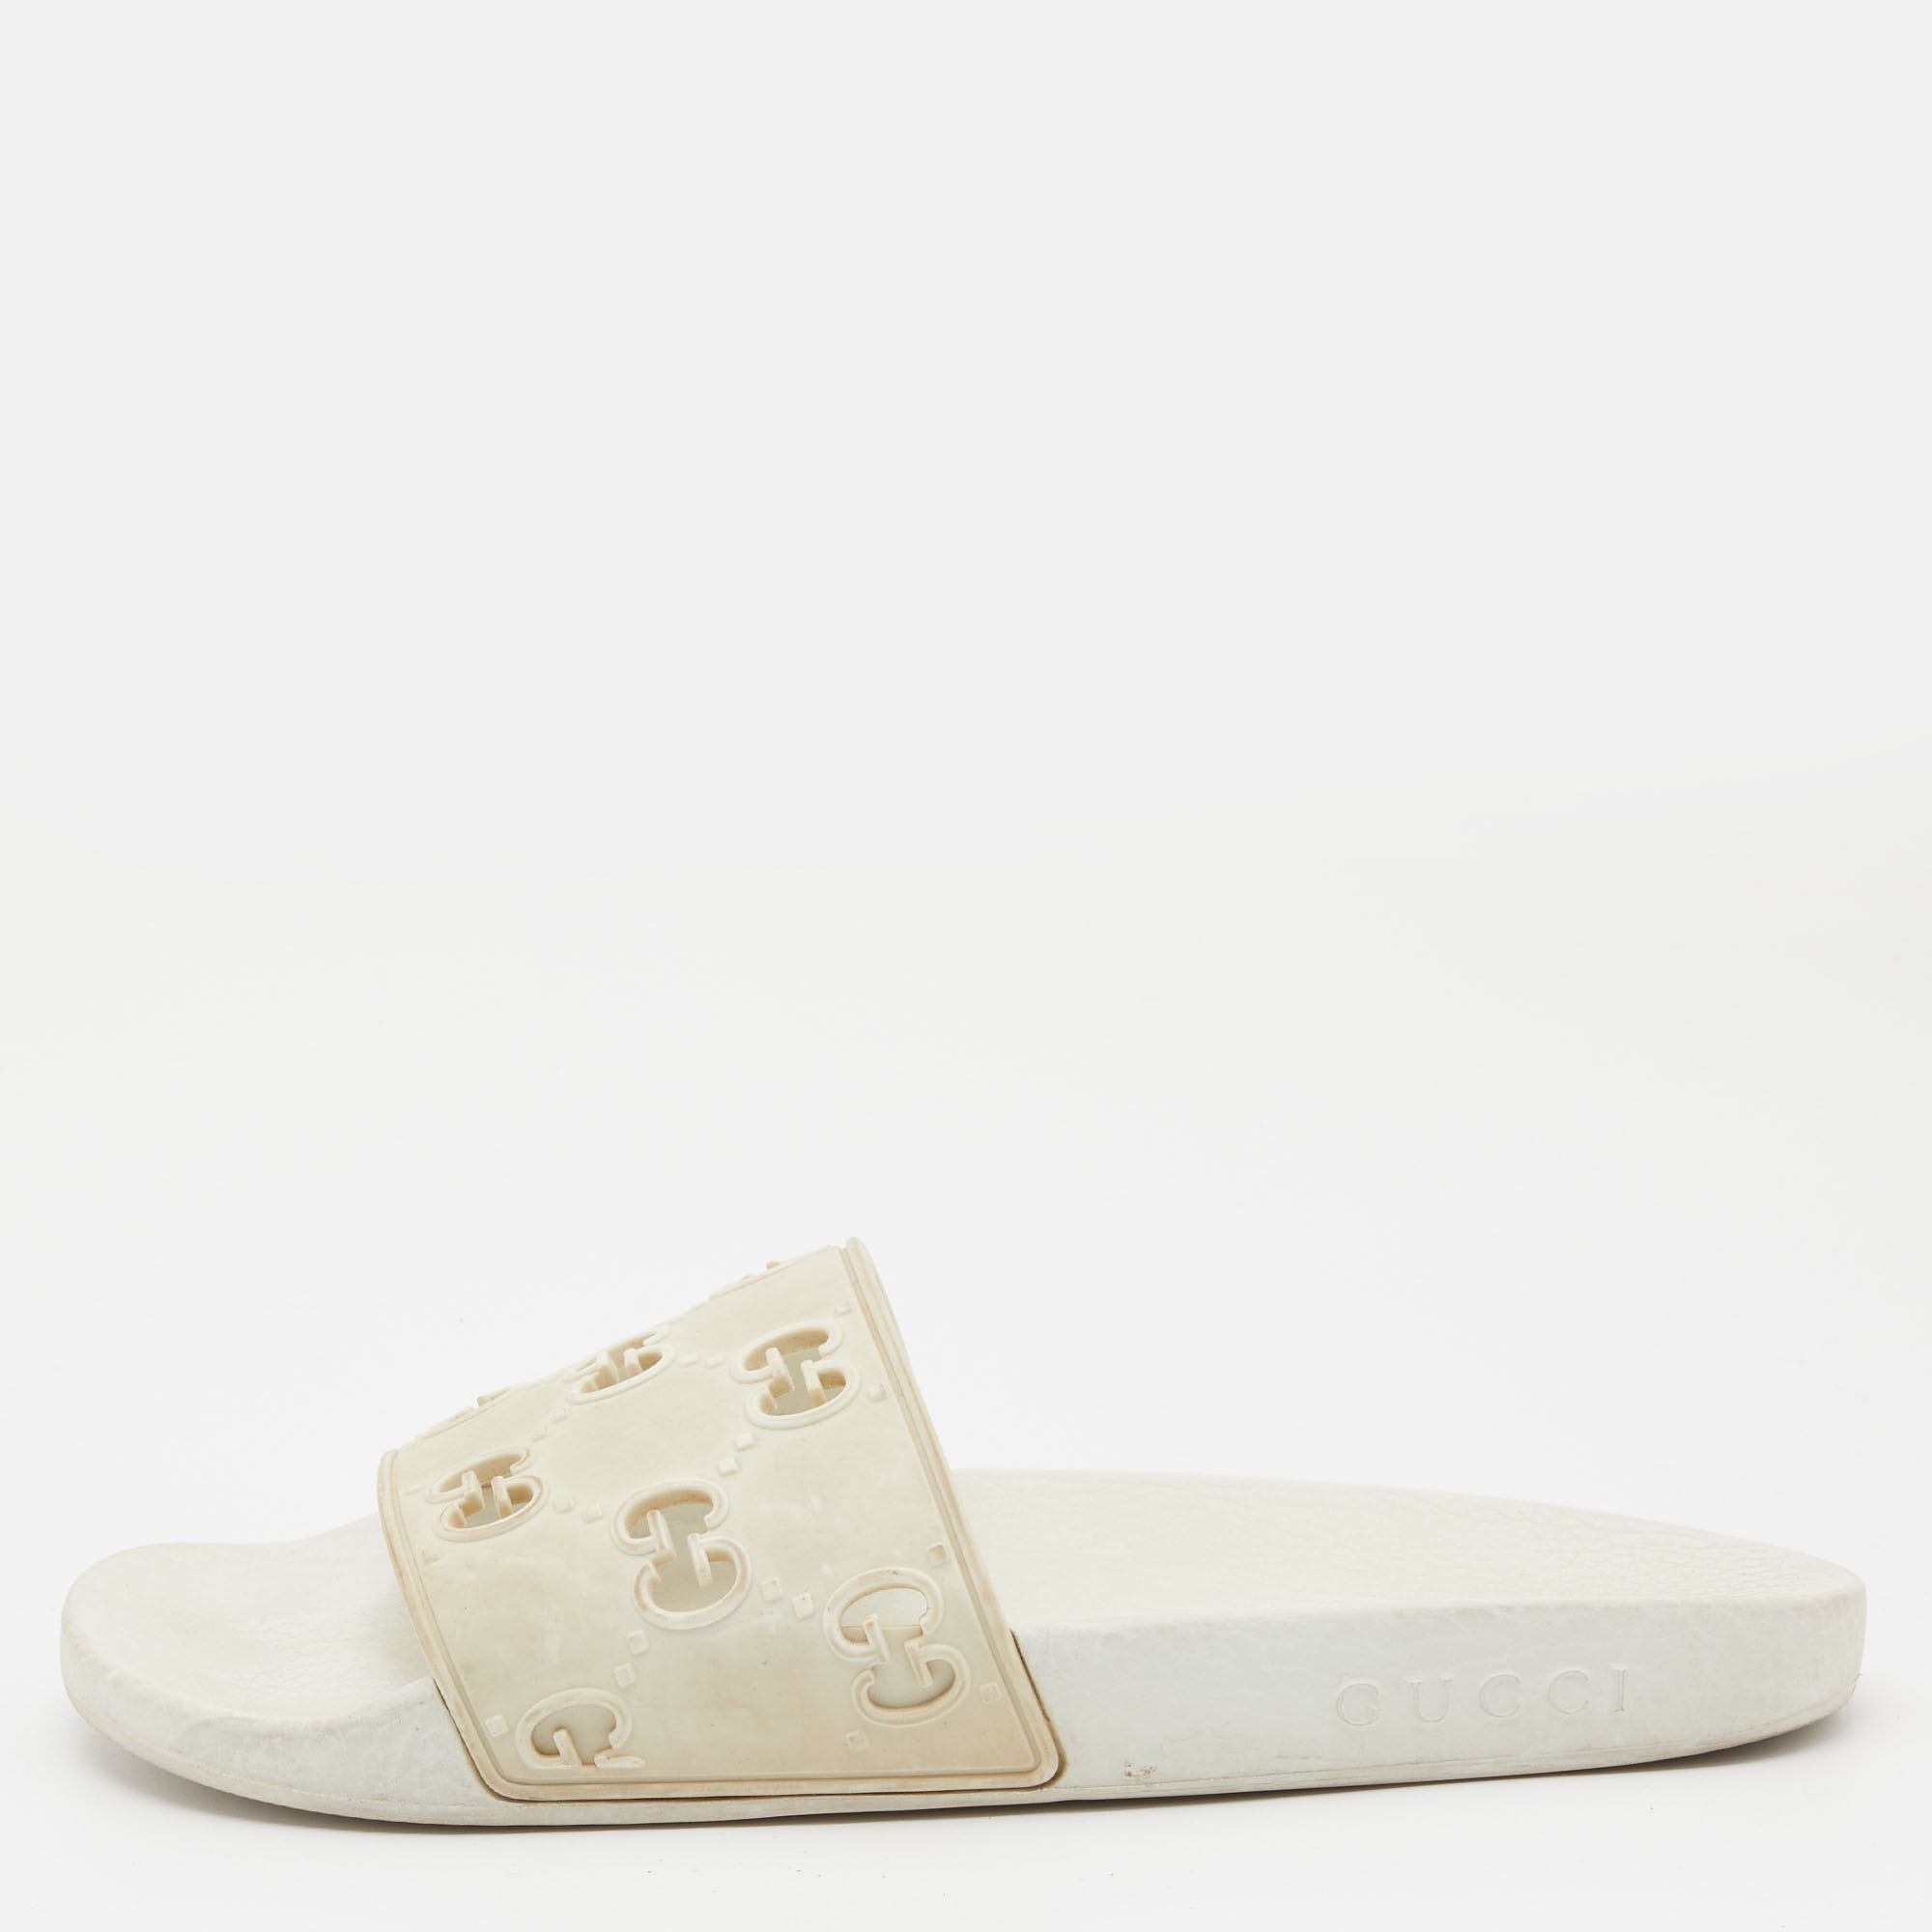 Pre-owned Gucci White Gg Laser Cut Rubber Slides Size 38